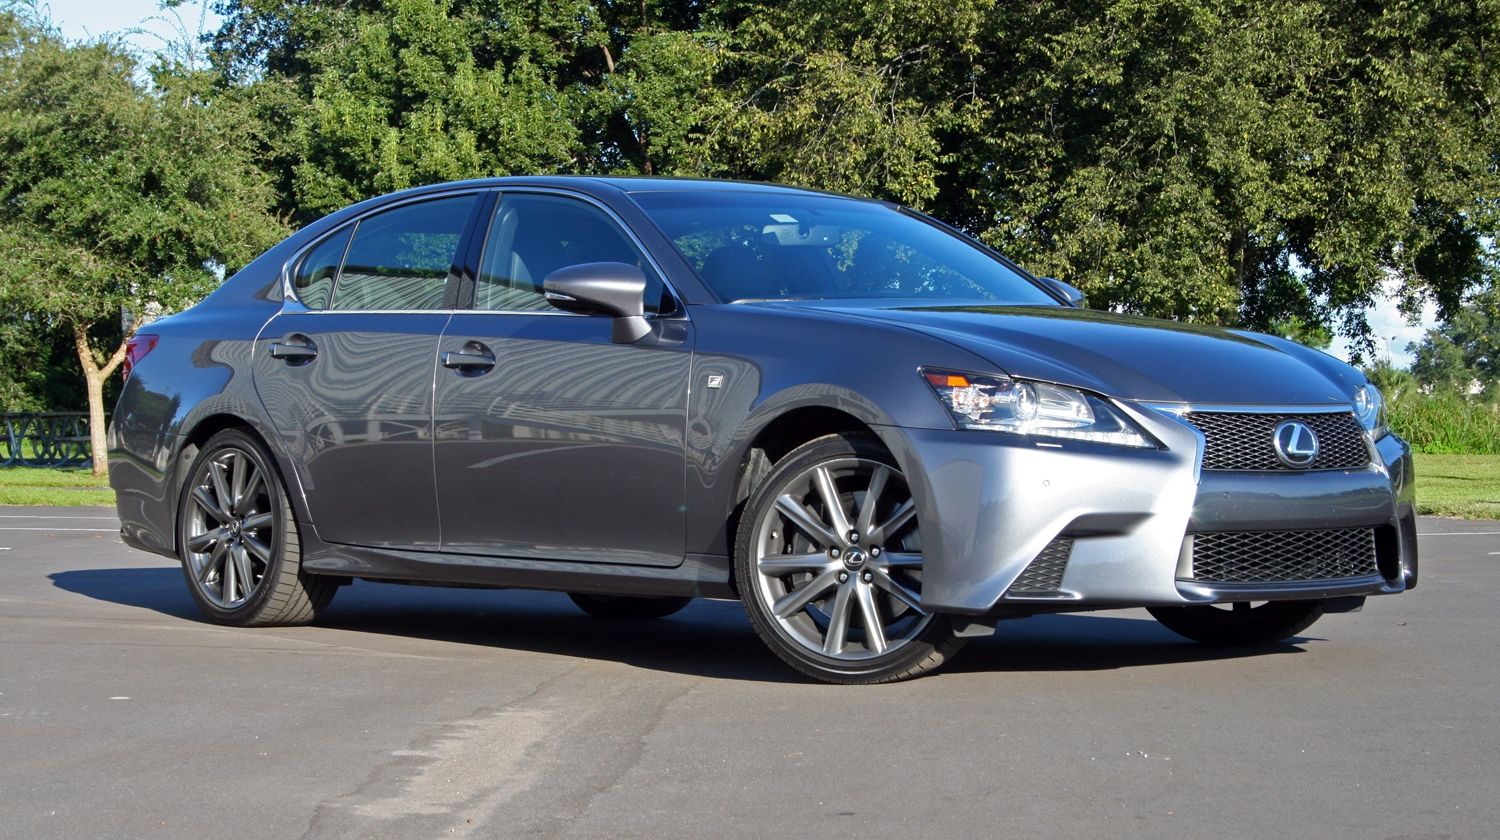  Mark McNabb had some time with the 2014 Lexus GS 350 F Sport. Check out his thoughts on TopSpeed.com/ 